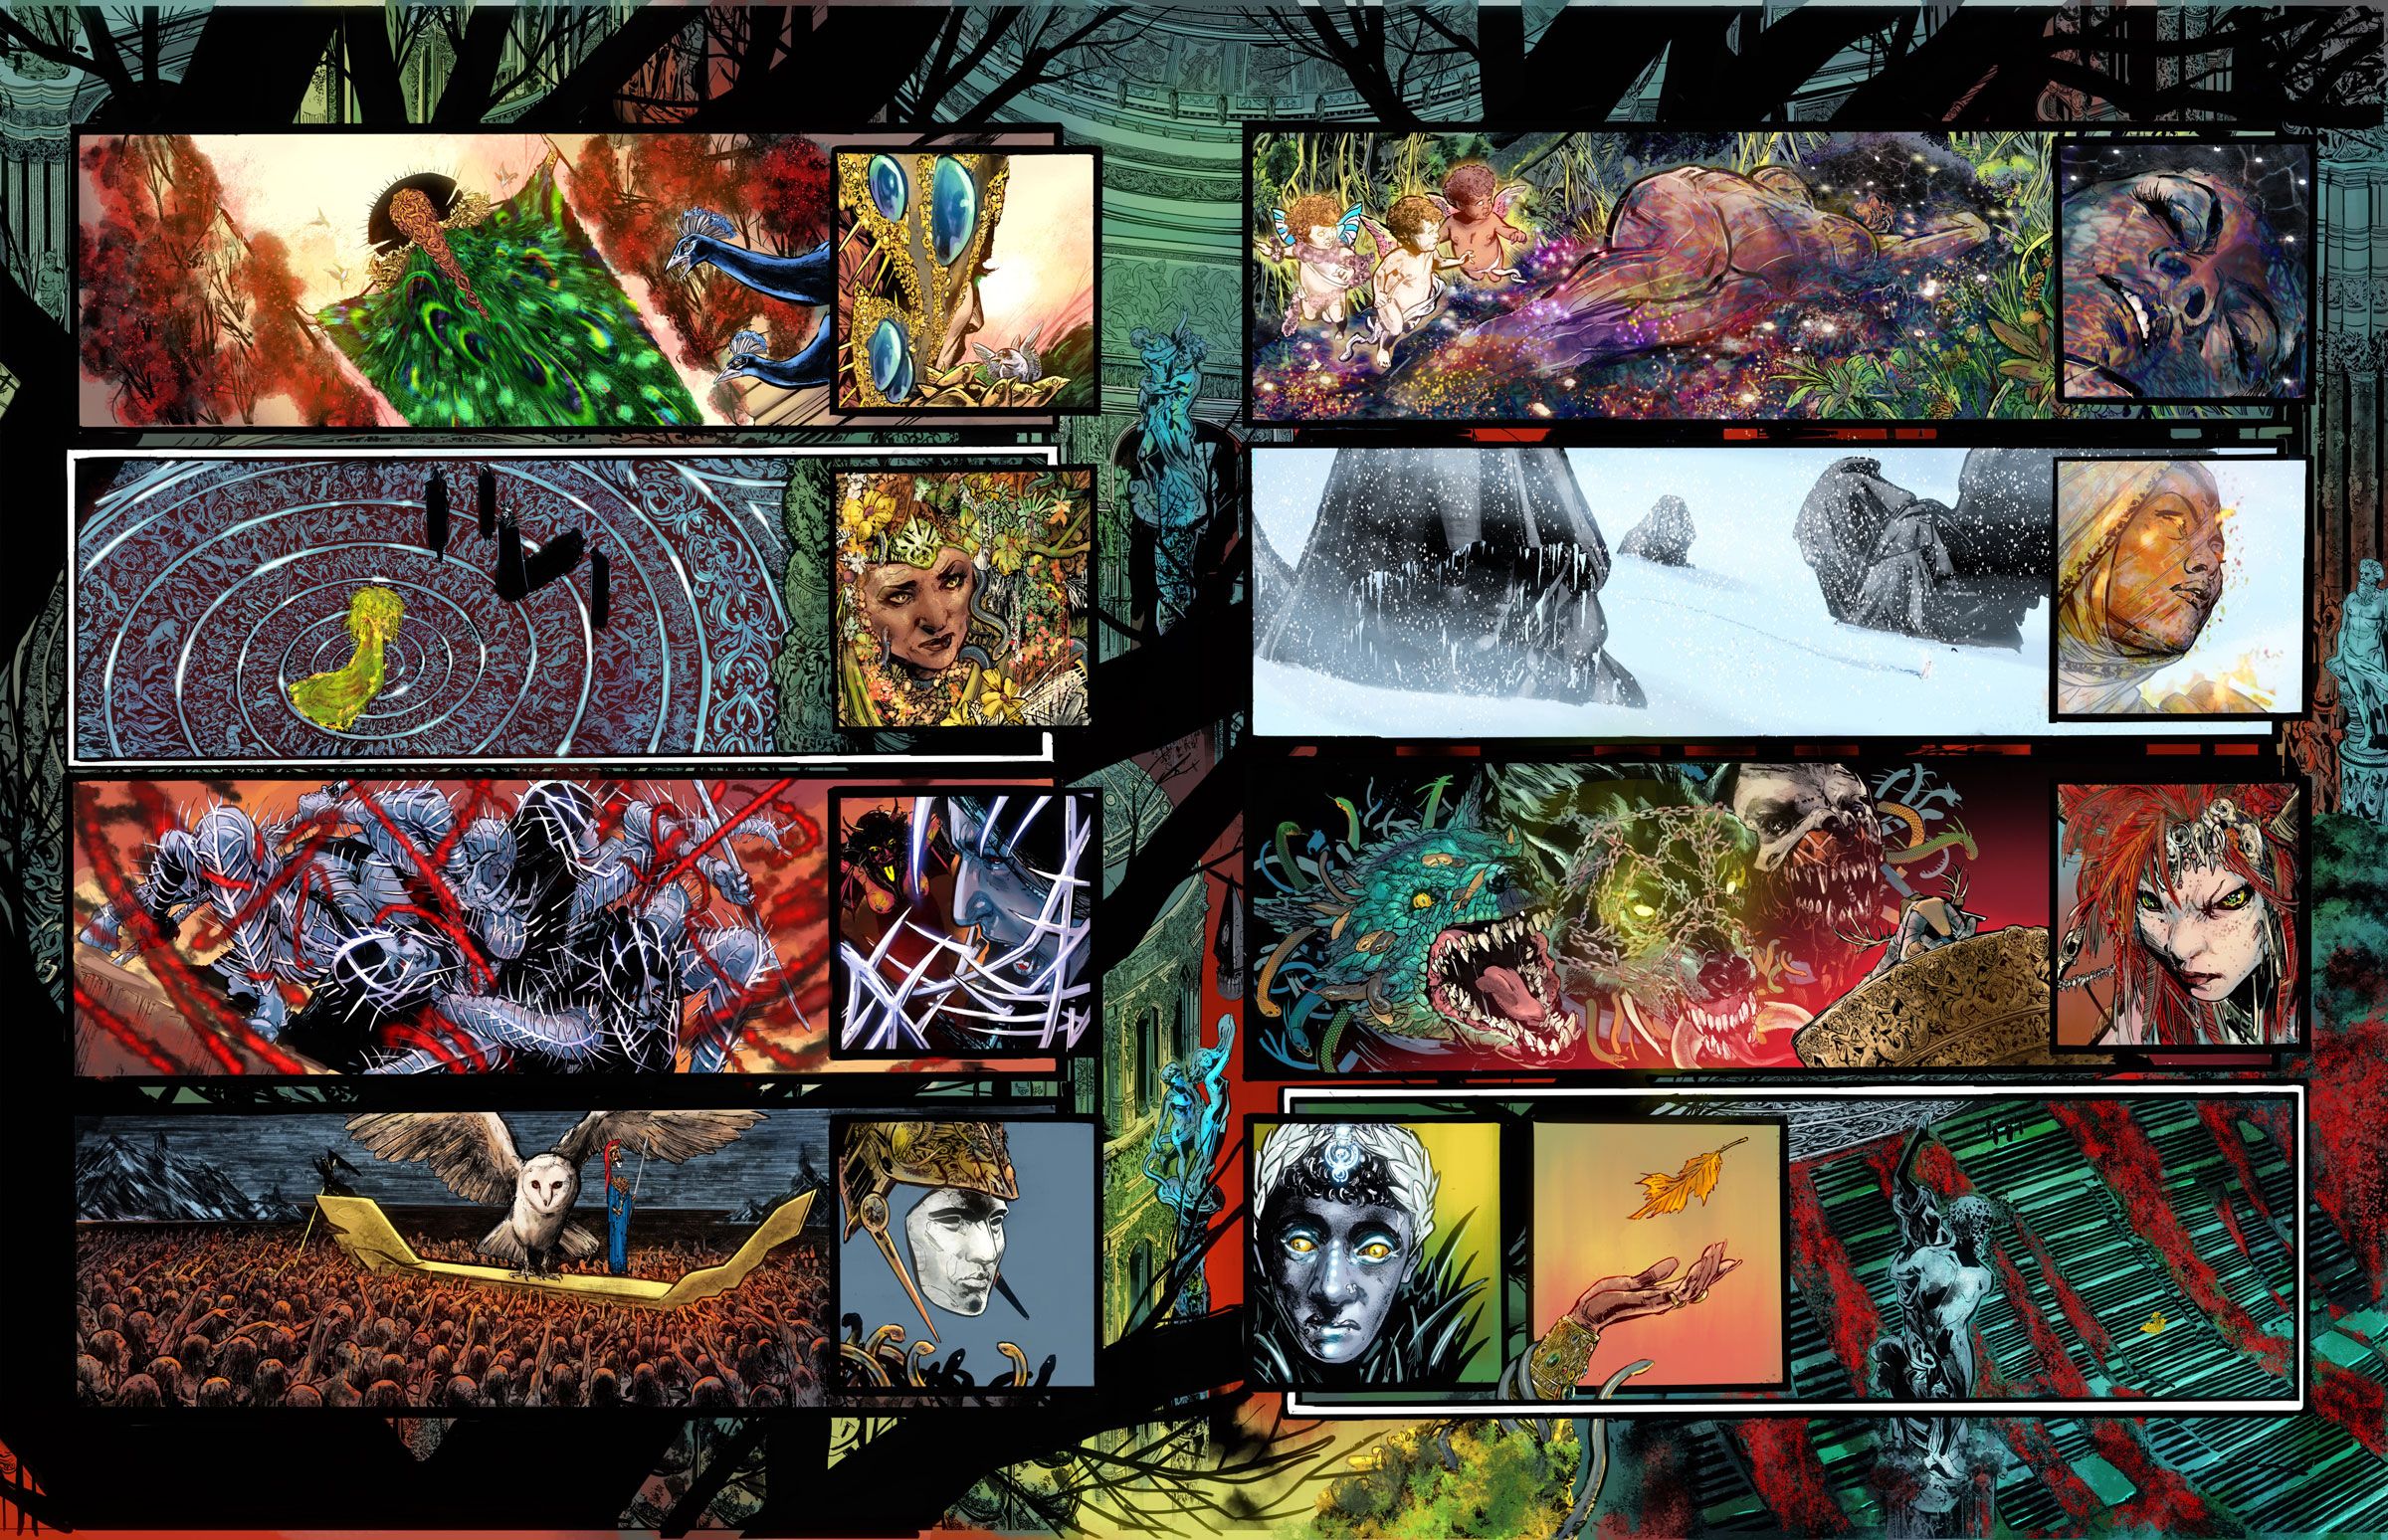 A lush and colorful splash page shows many elements pulled from mythology.